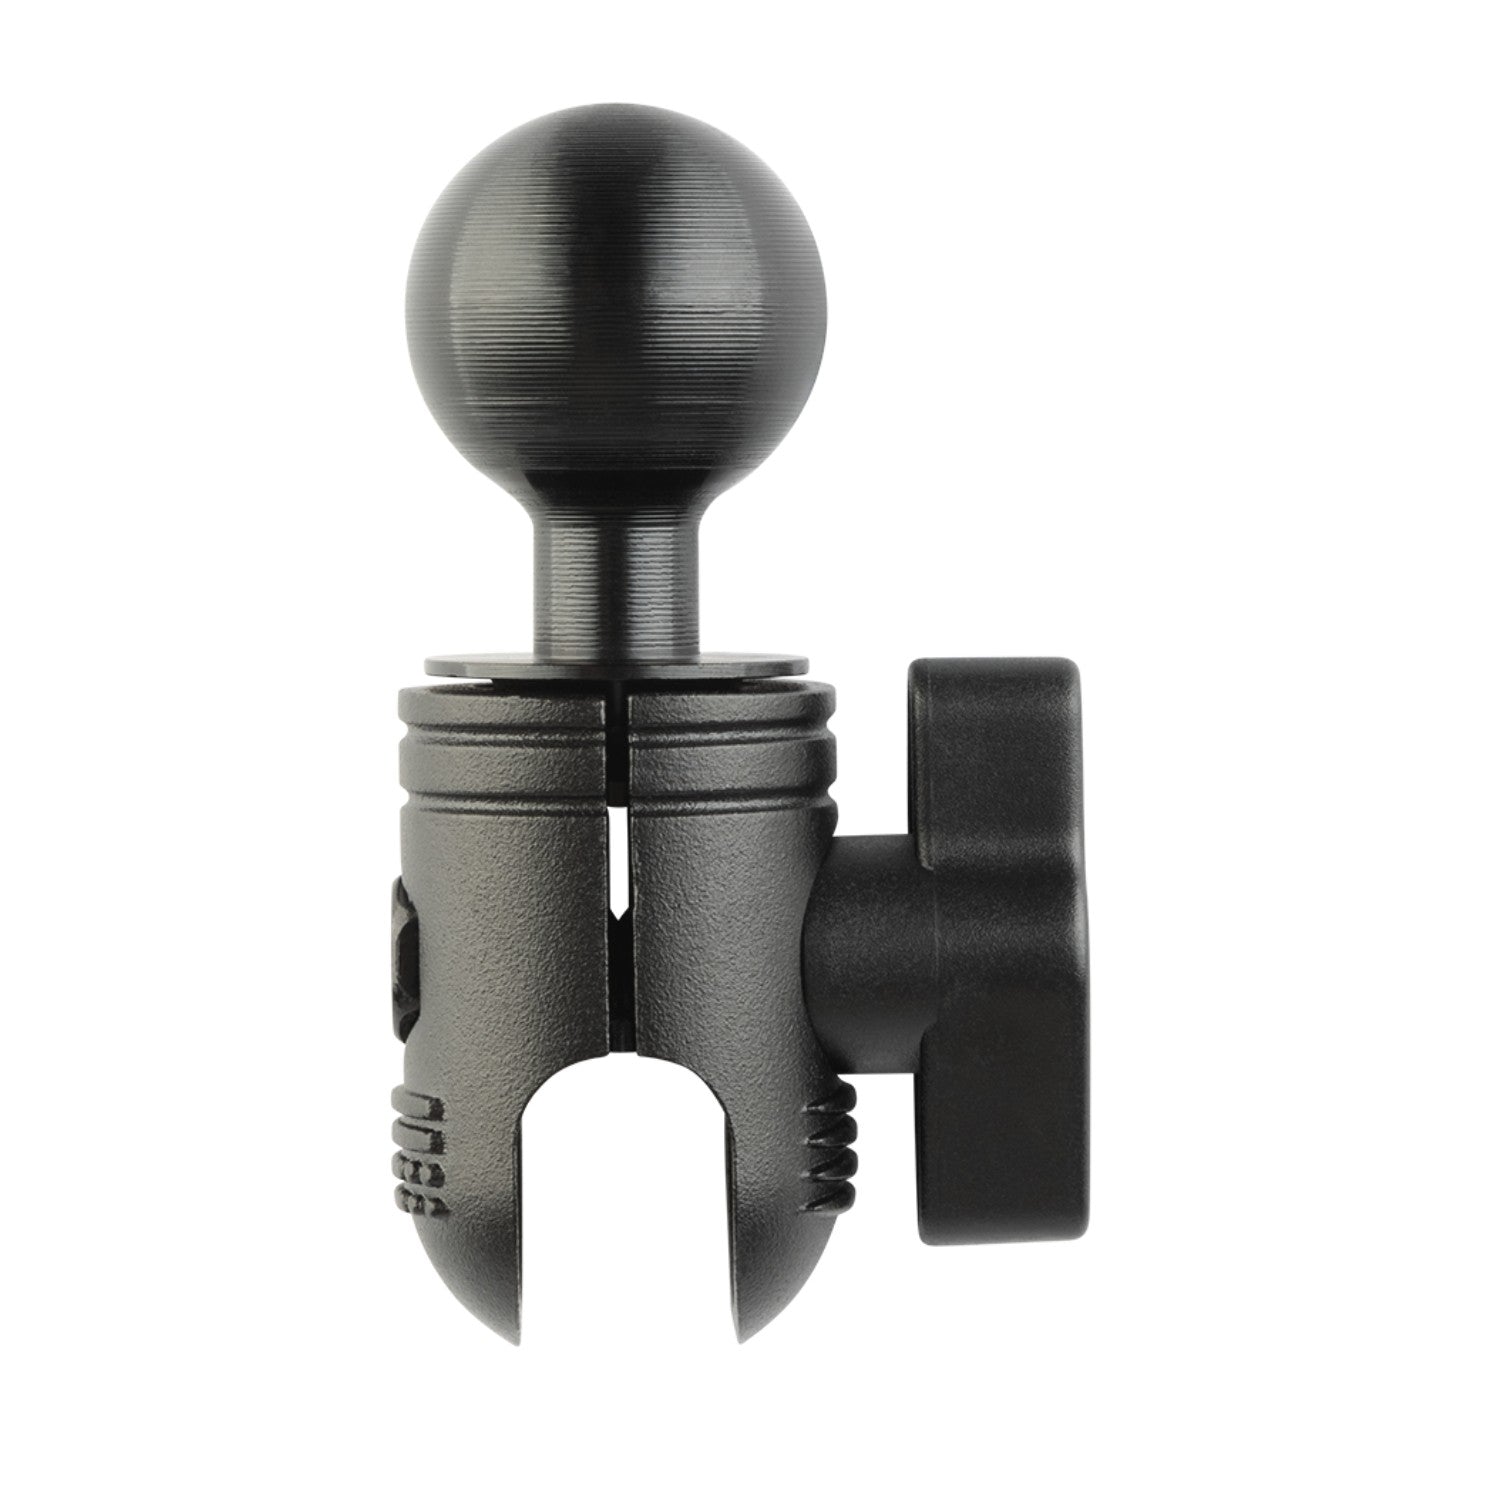 20mm Flange Socket to 25mm (1 Inch) Ball Adapter - Bulletpoint Mounting ...